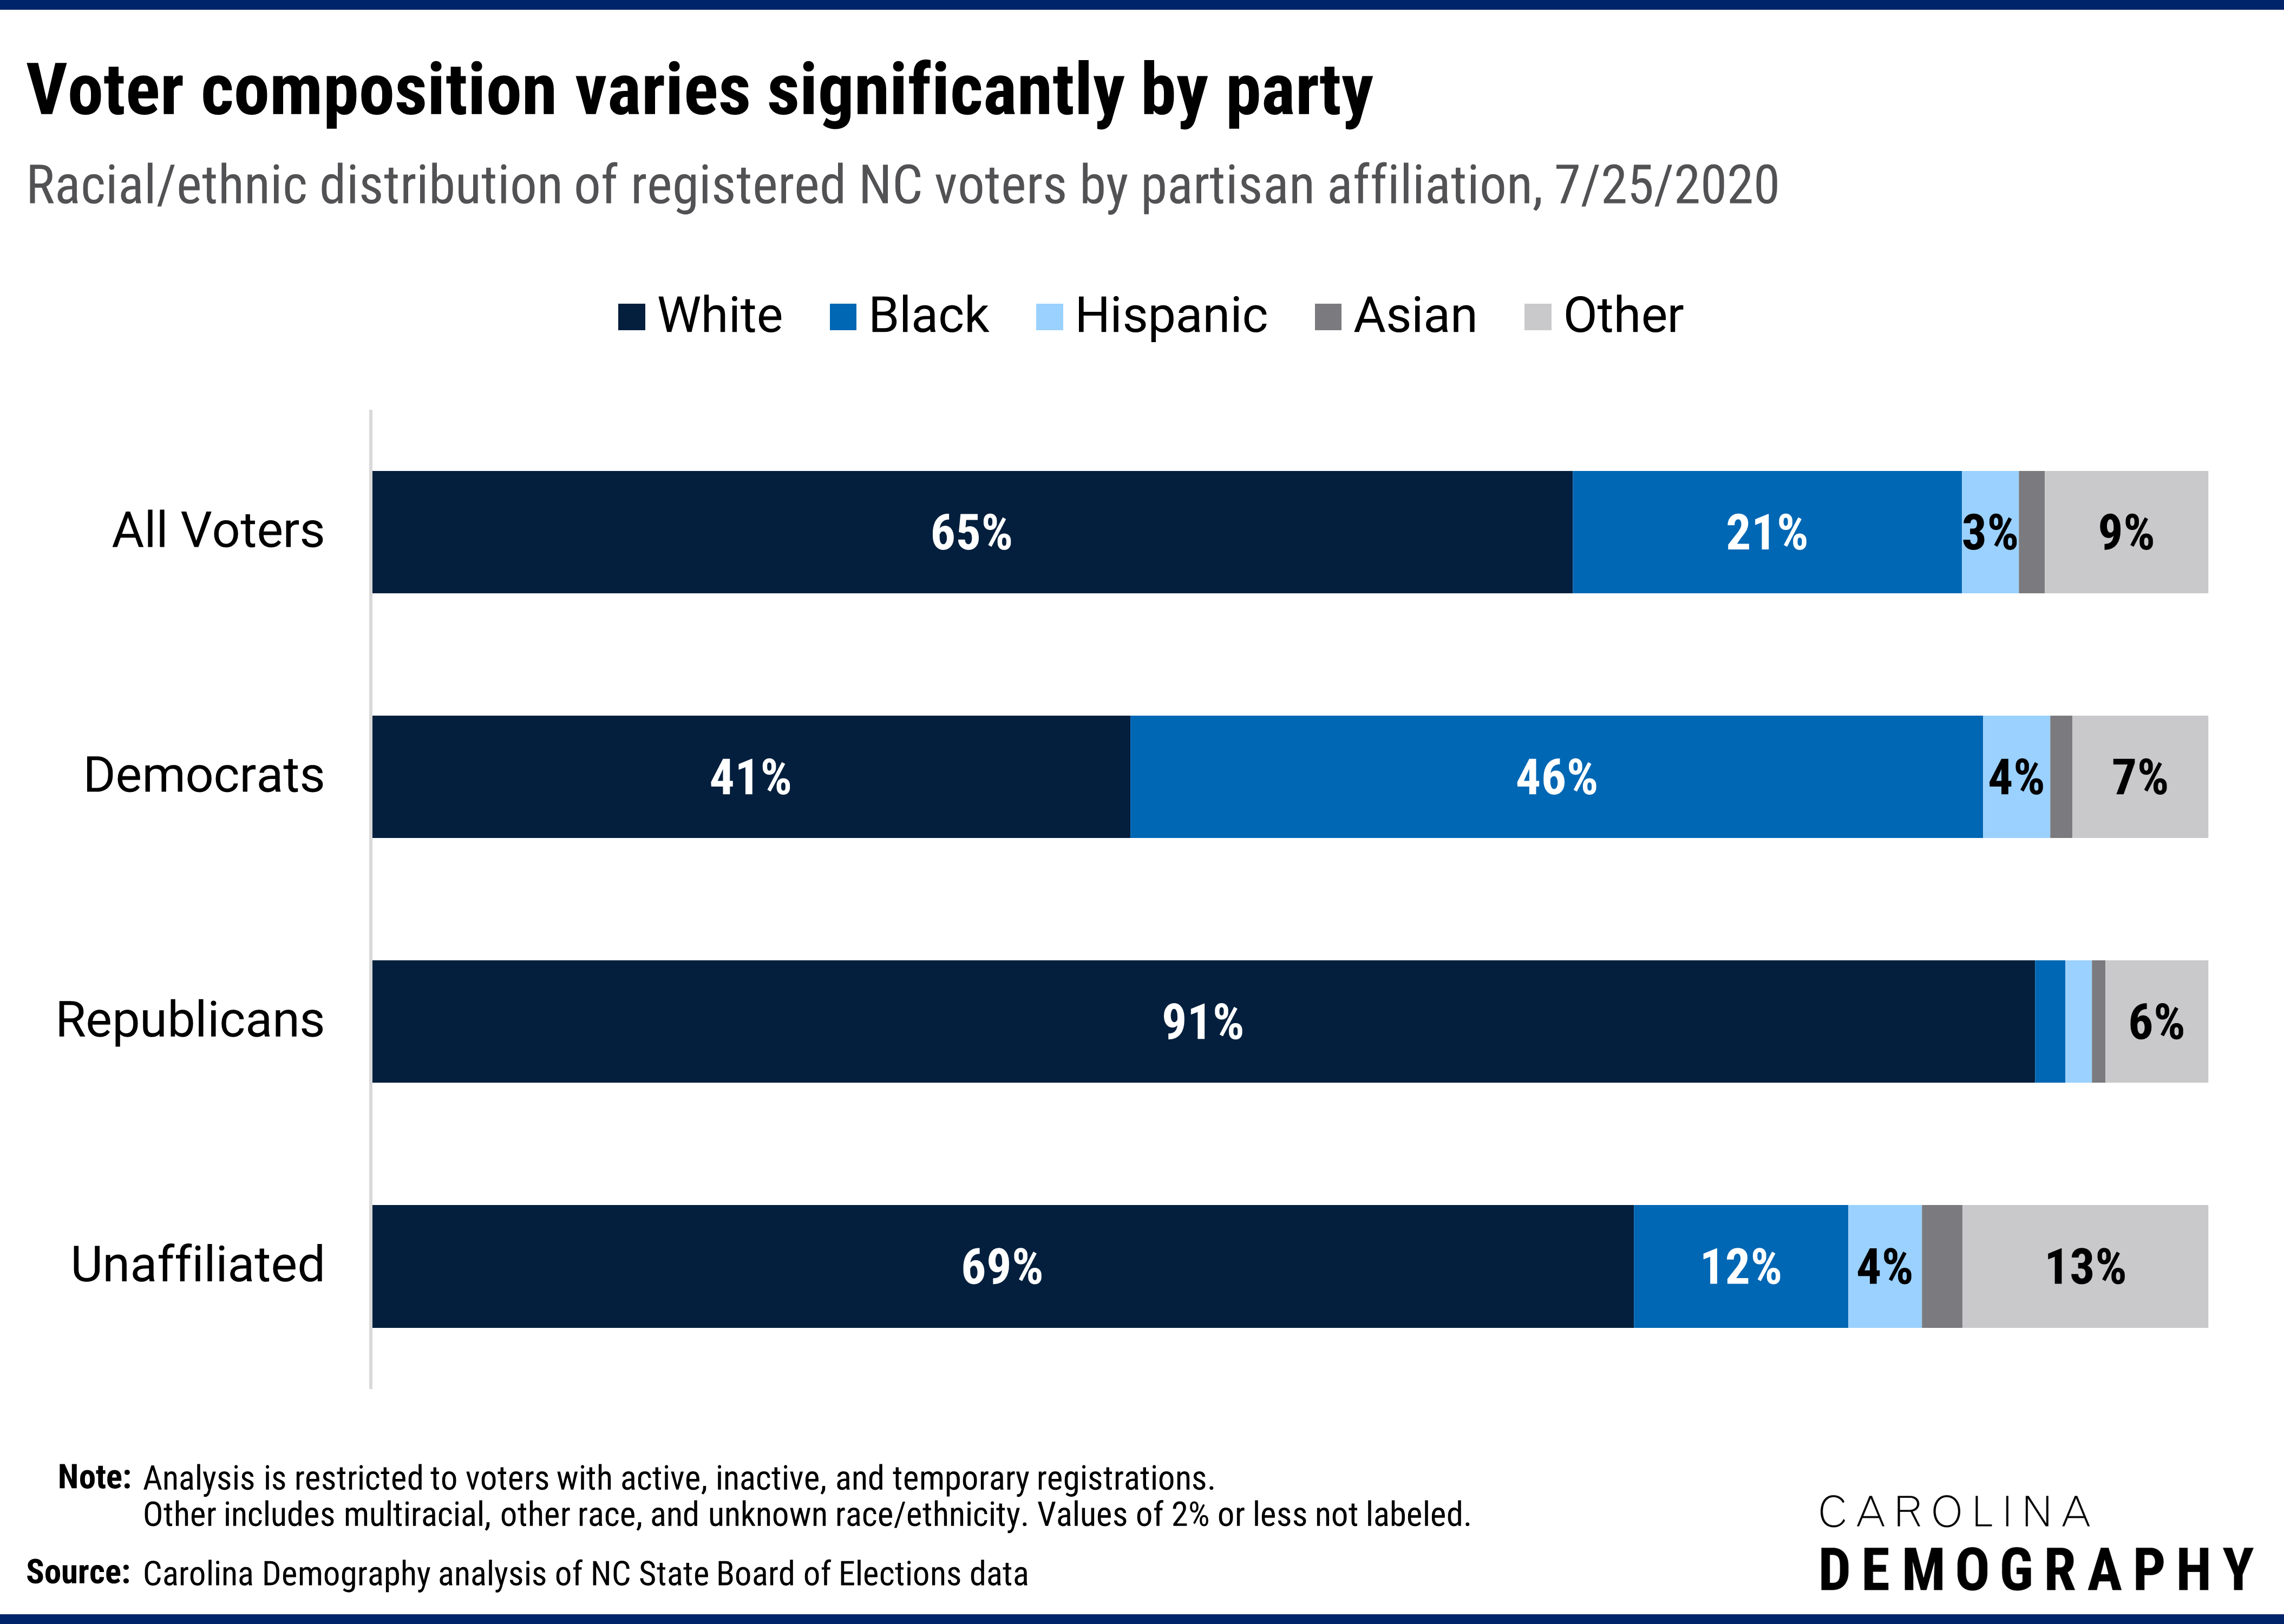 Voter composition varies significantly by party Racial/ethnic distribution of registered NC voters by partisan affiliation, 7/25/2020. Democratic voters are the only party where white voters are a minority of registered voters: 43% of registered voters identify as white. Black voters comprise the largest share of registered Democrats (45%).